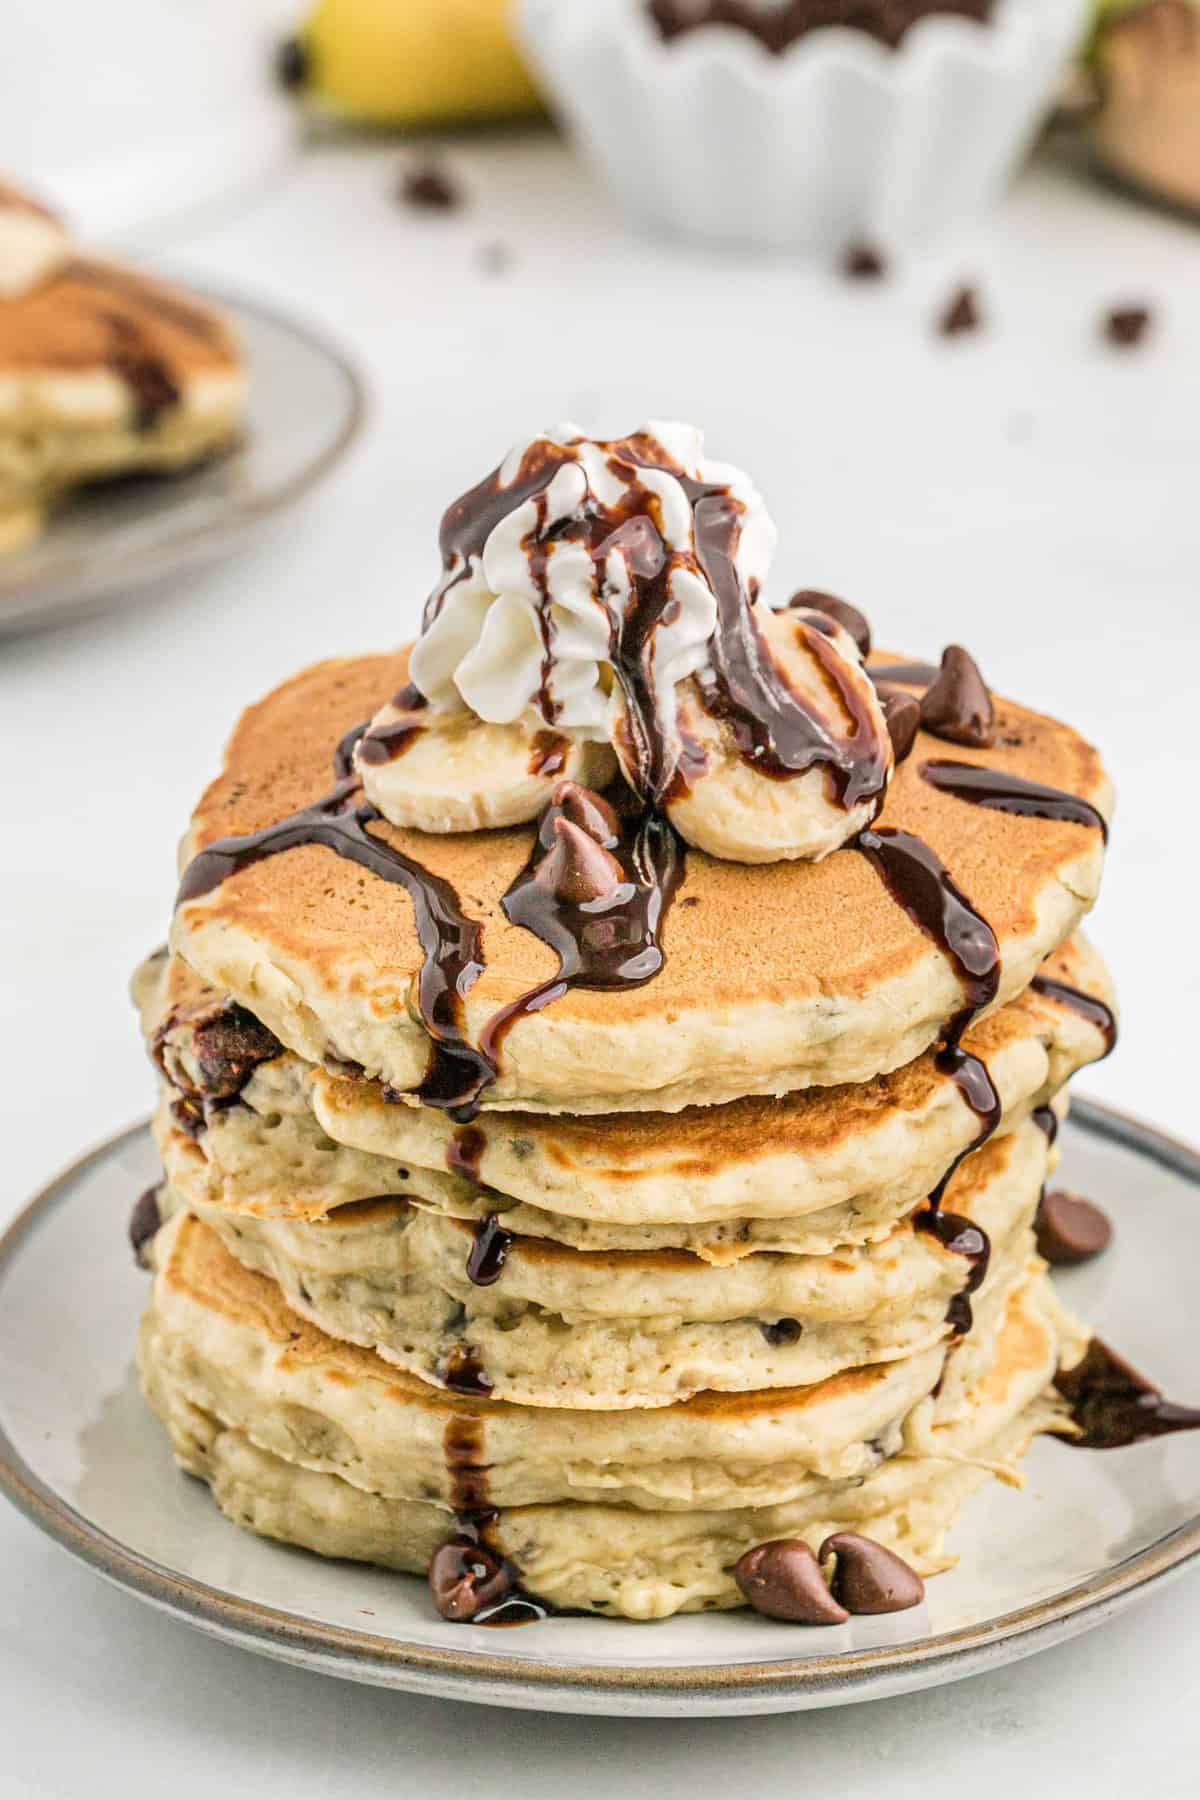 Stack of banana pancakes with chocolate chips.